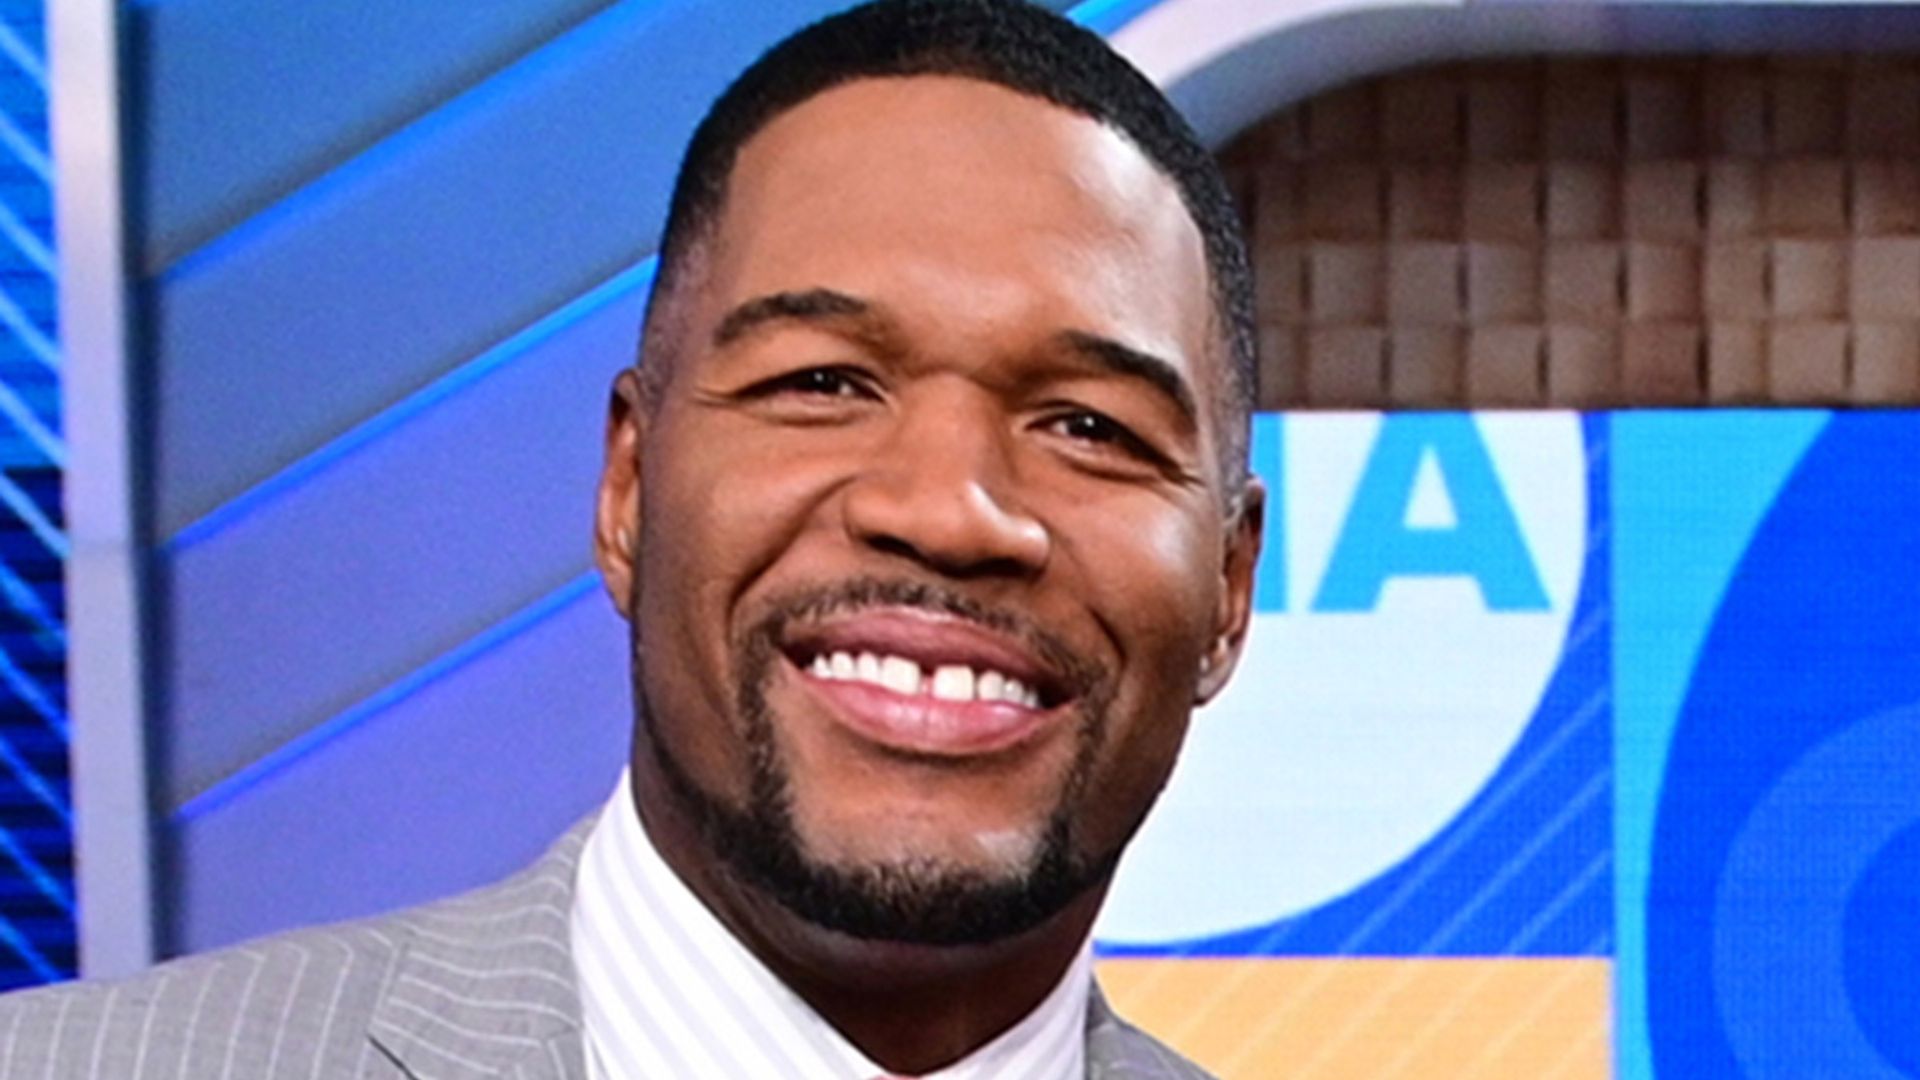 michael strahan throwback photo has fans saying the same thing